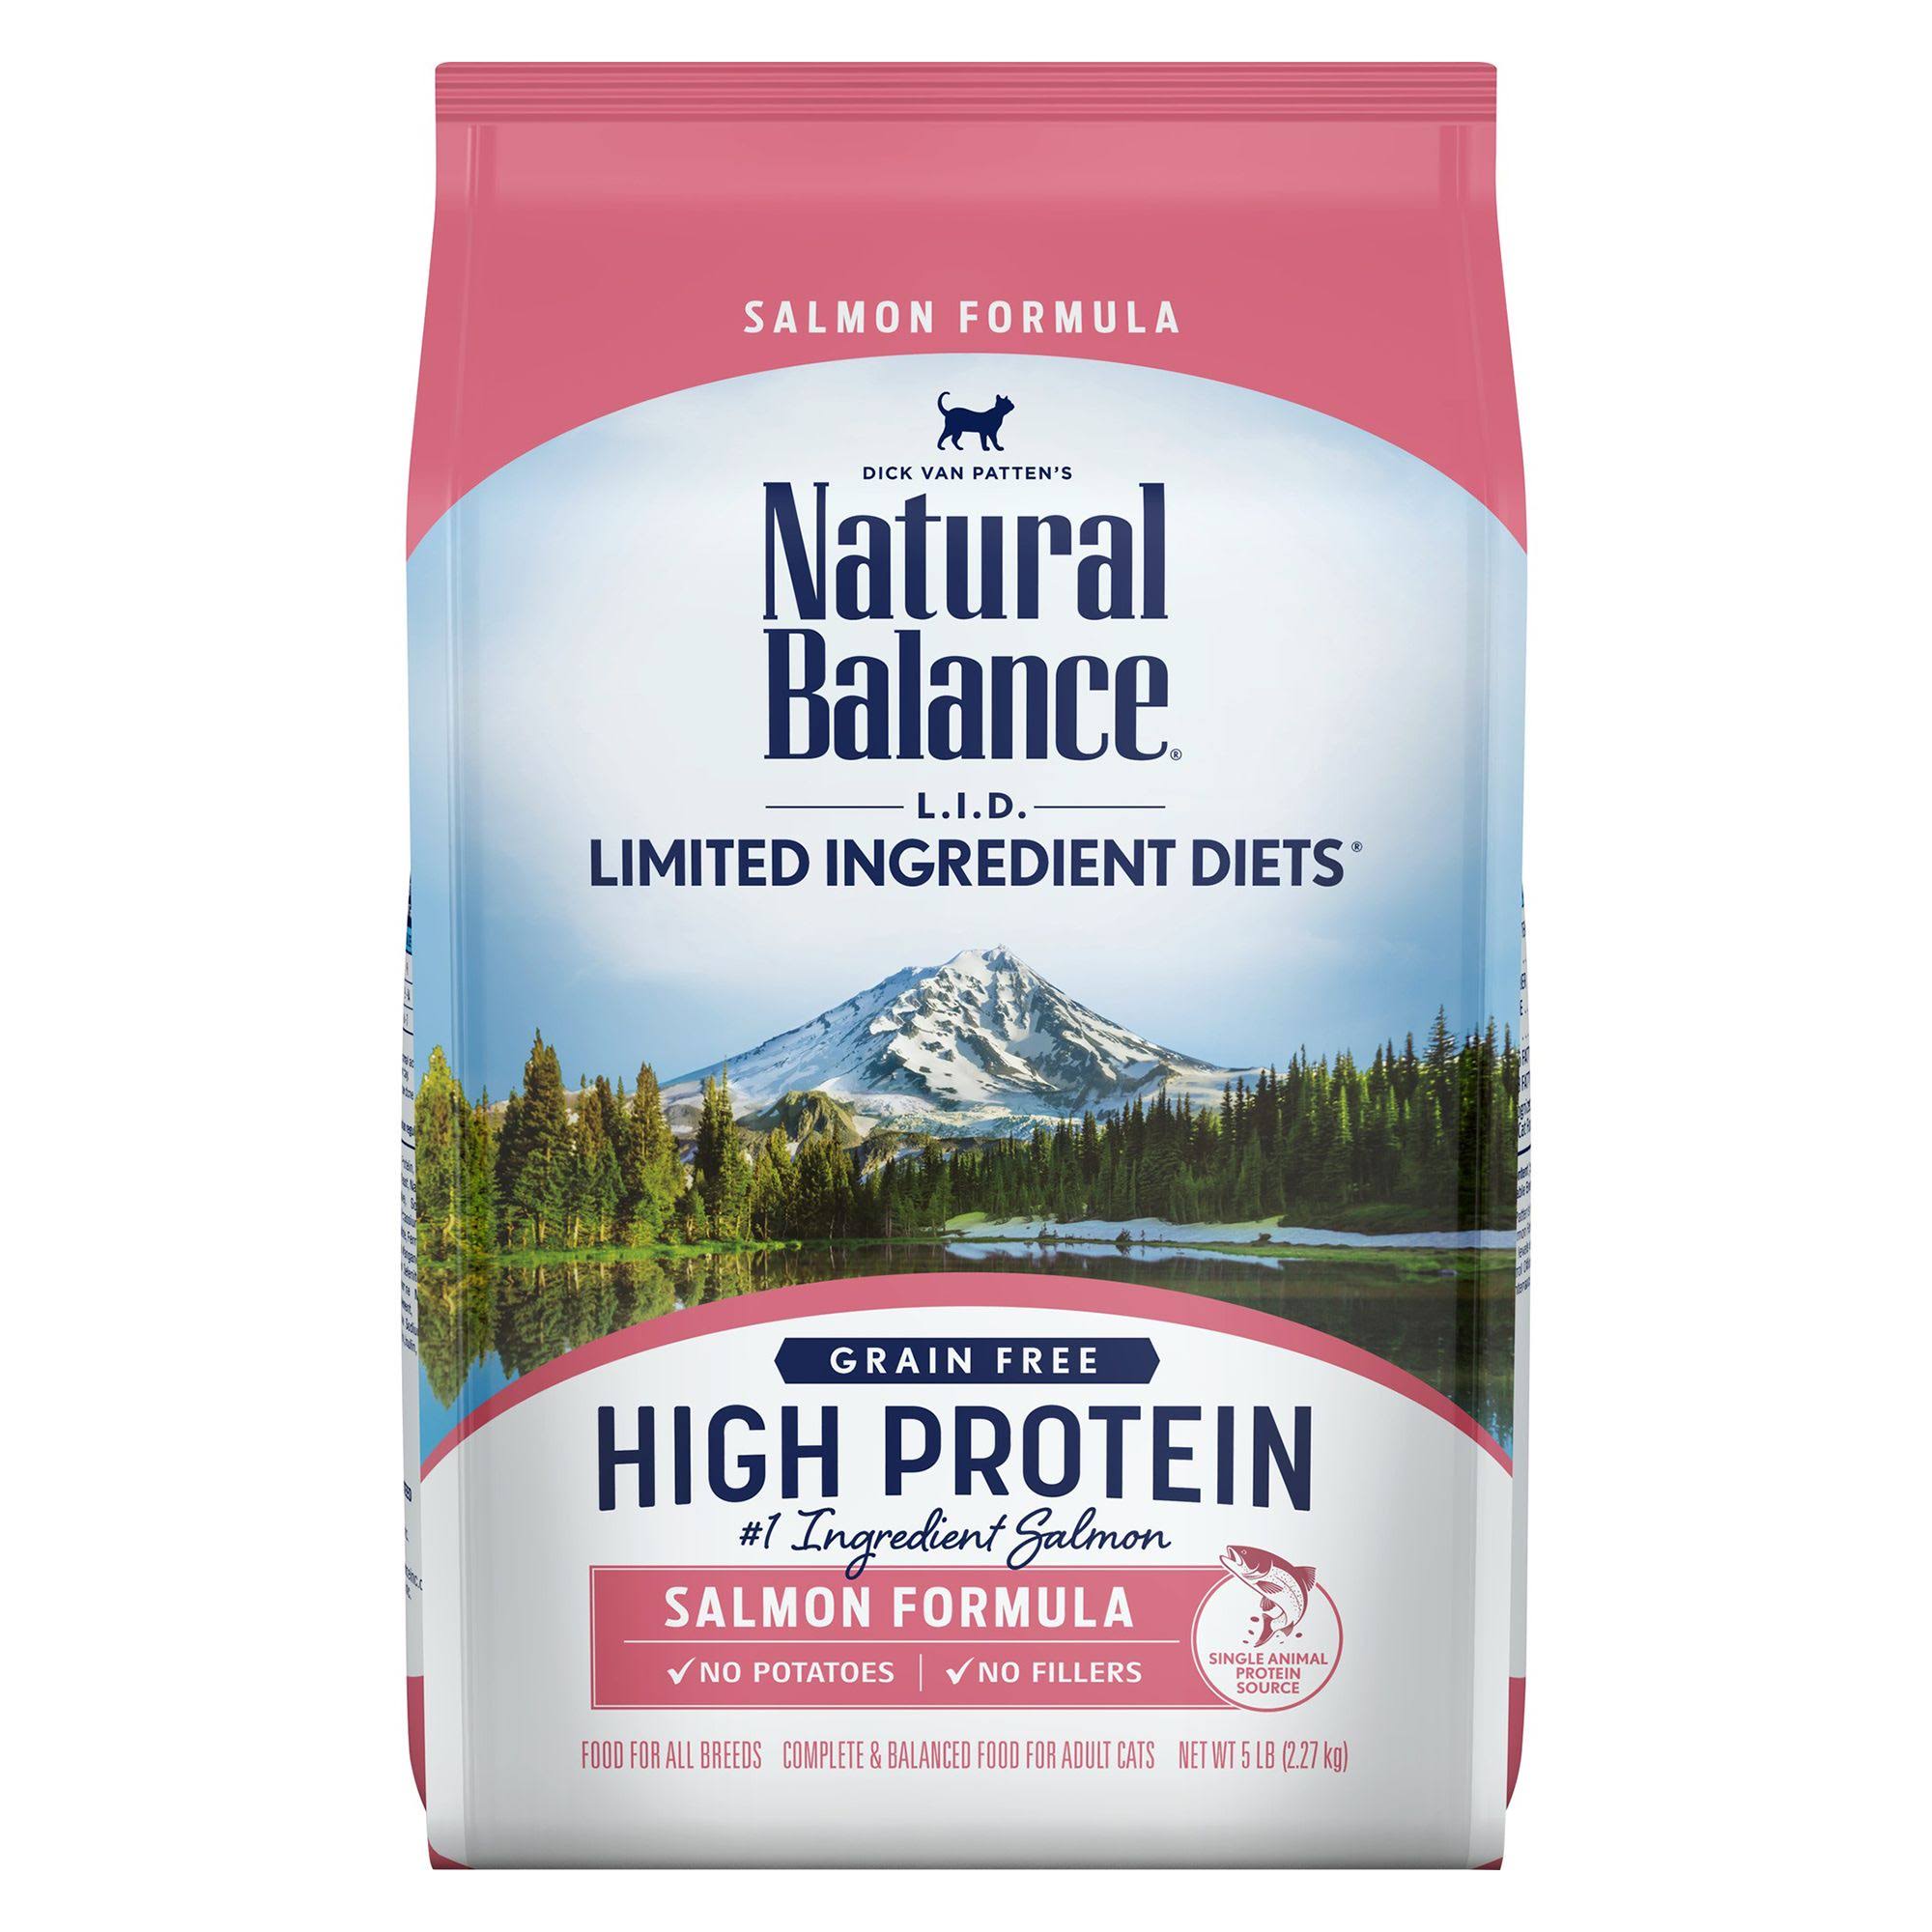 Natural Balance L.I.D. Limited Ingredient Diets High Protein Dry Cat Food, Salmon Formula, 5 Pounds, Grain Free